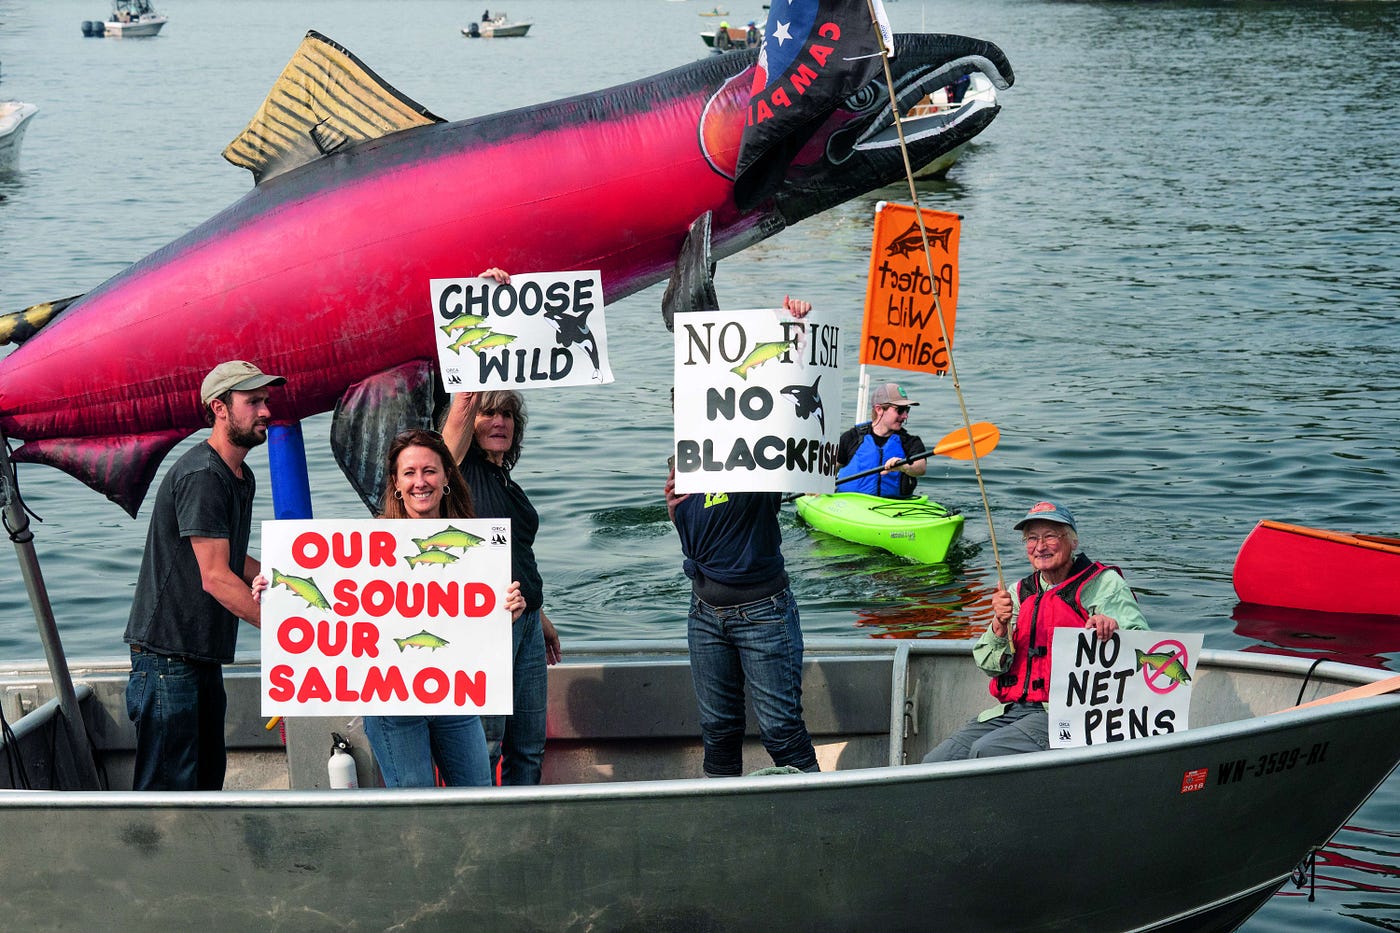 Get Involved — Our Sound, Our Salmon